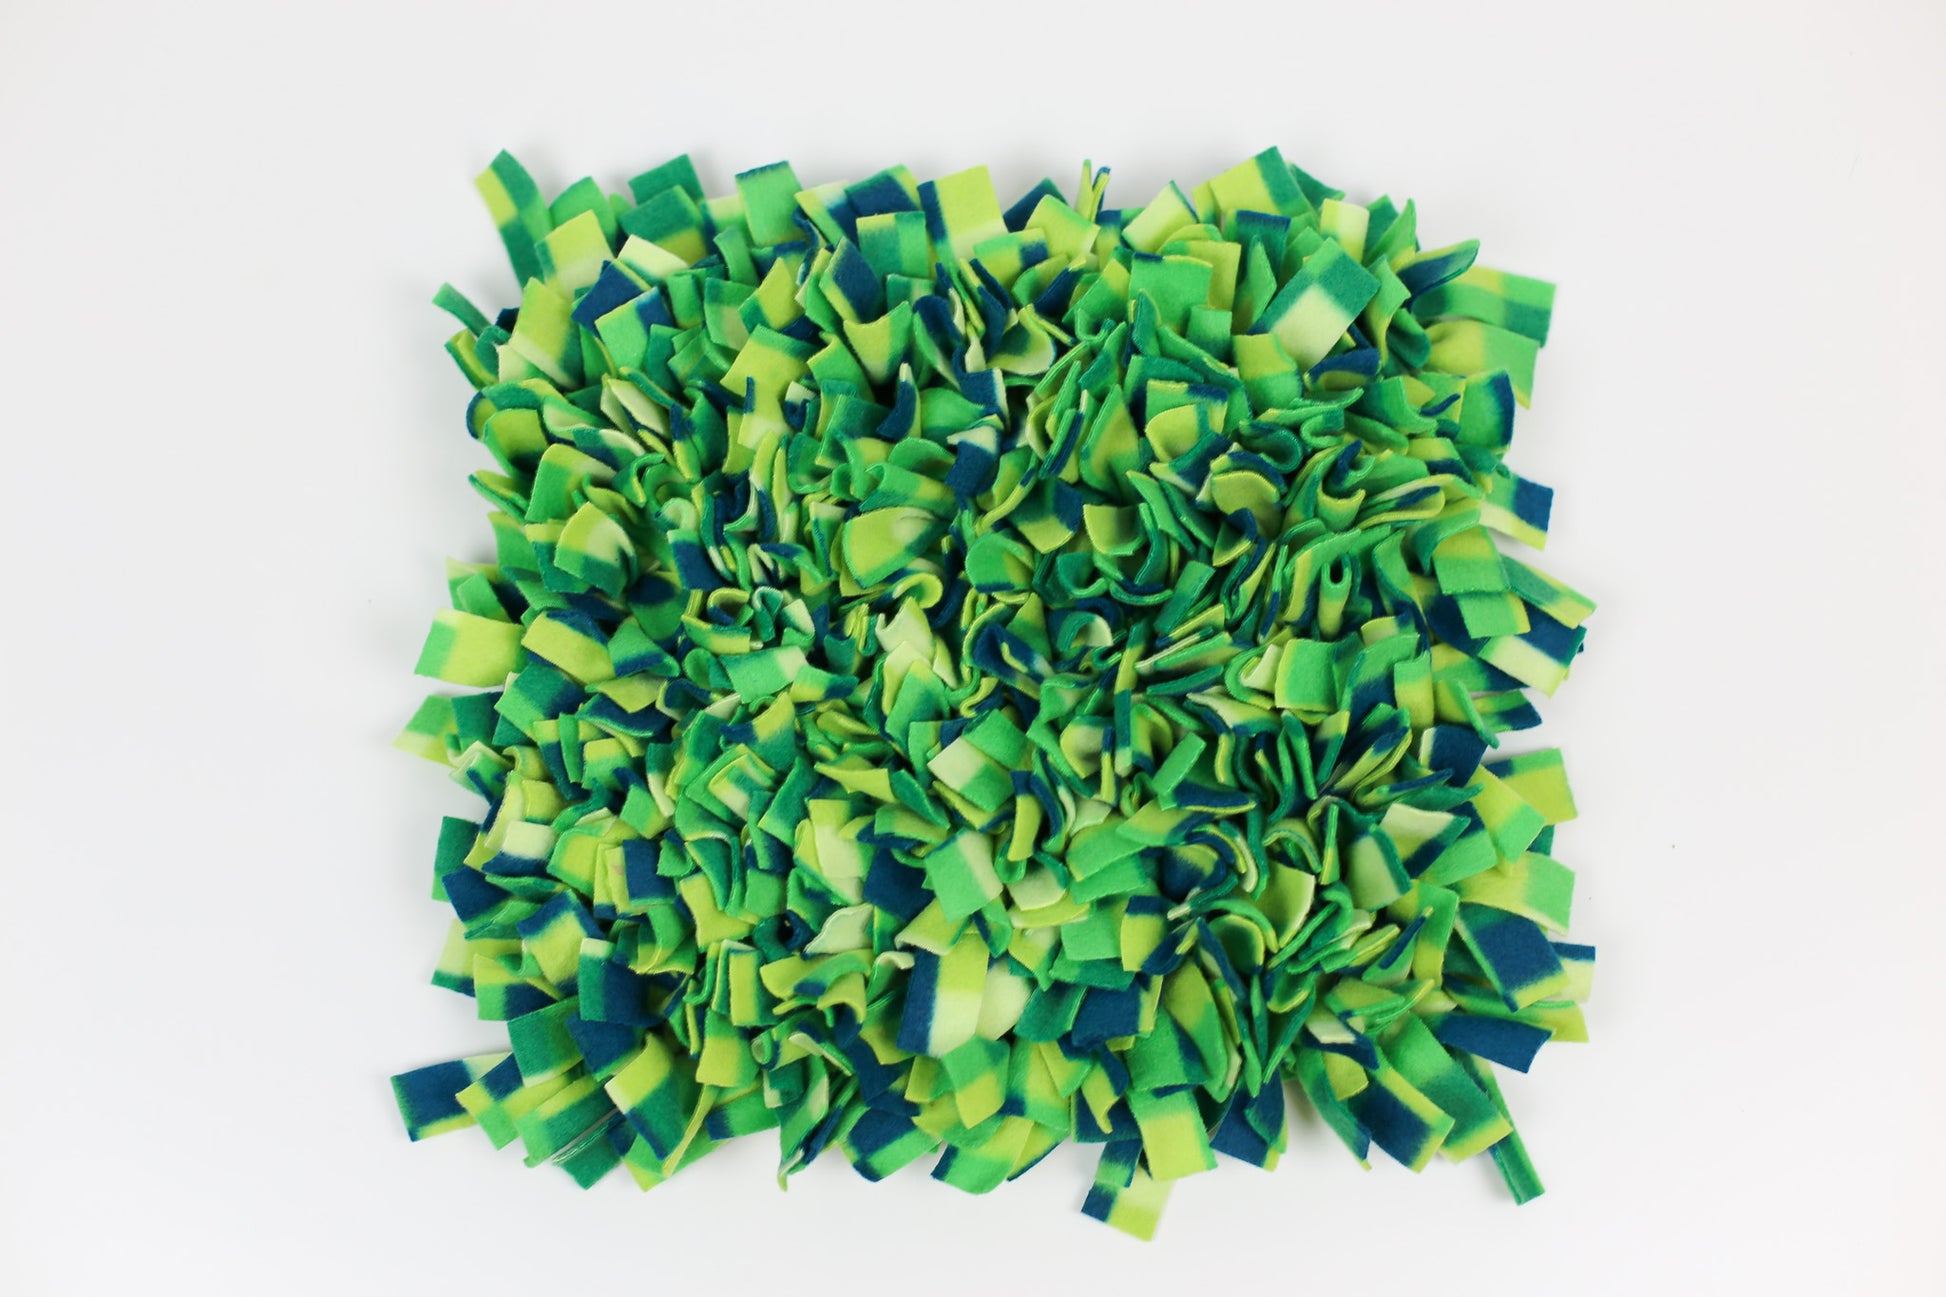 Vegetable Garden Snuffle Mat – Fit for a Pit